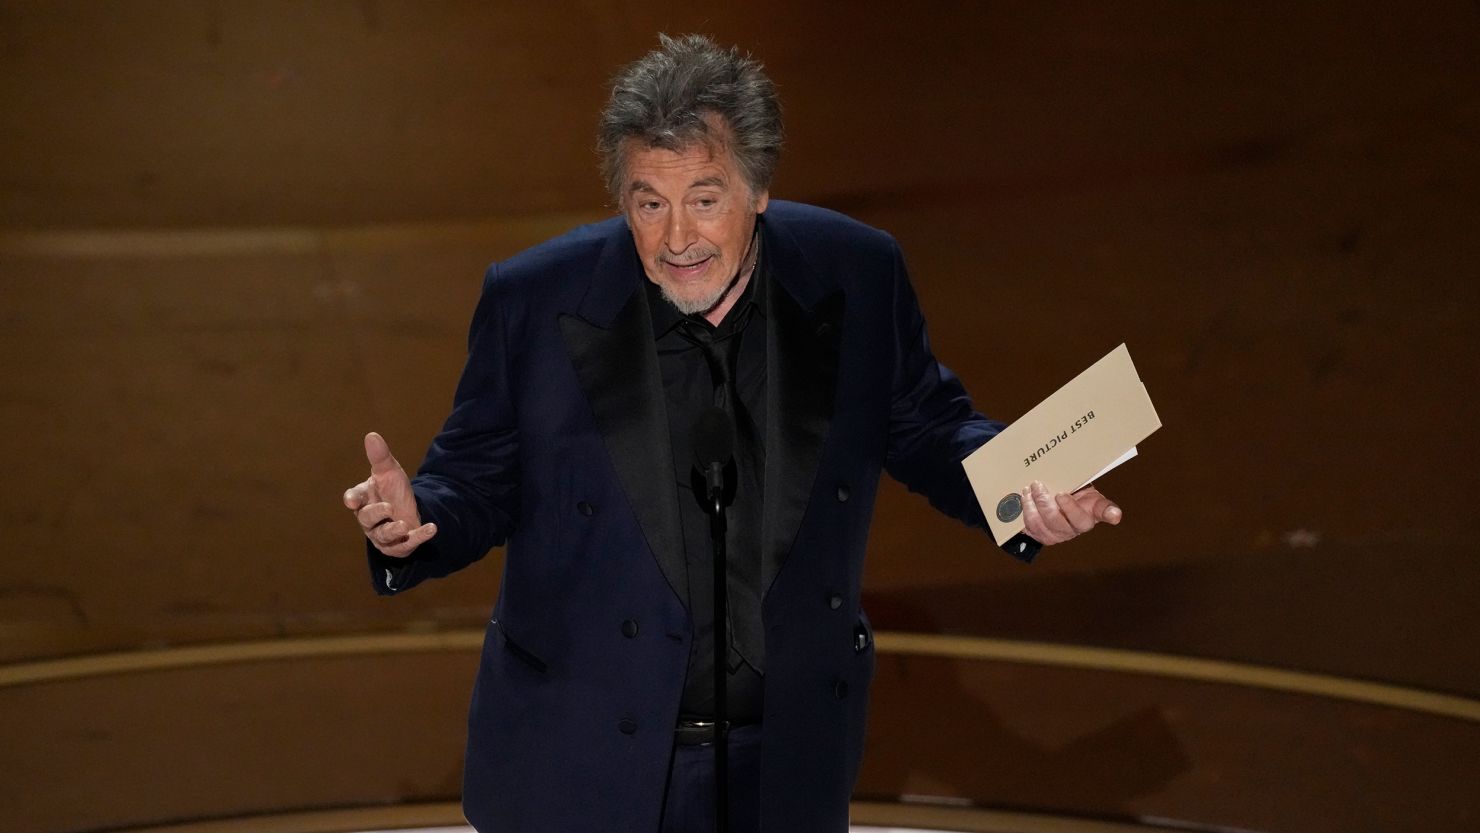 Al Pacino presents the award for best picture during the Oscars on Sunday, March 10.